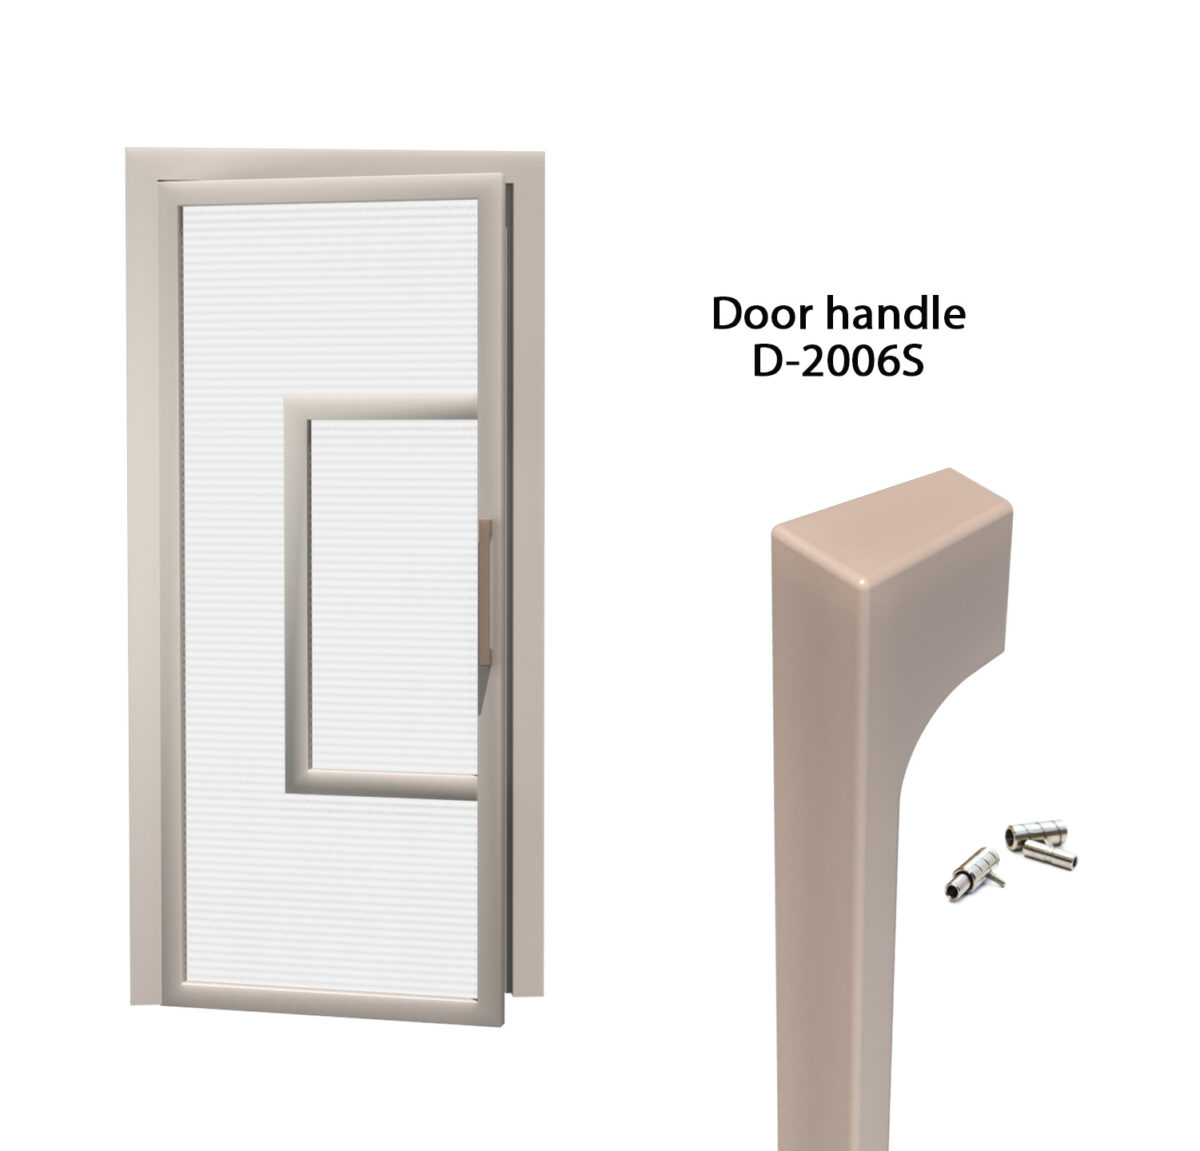 Handrail for loft-style interior doors D-2006S RAL set of 2